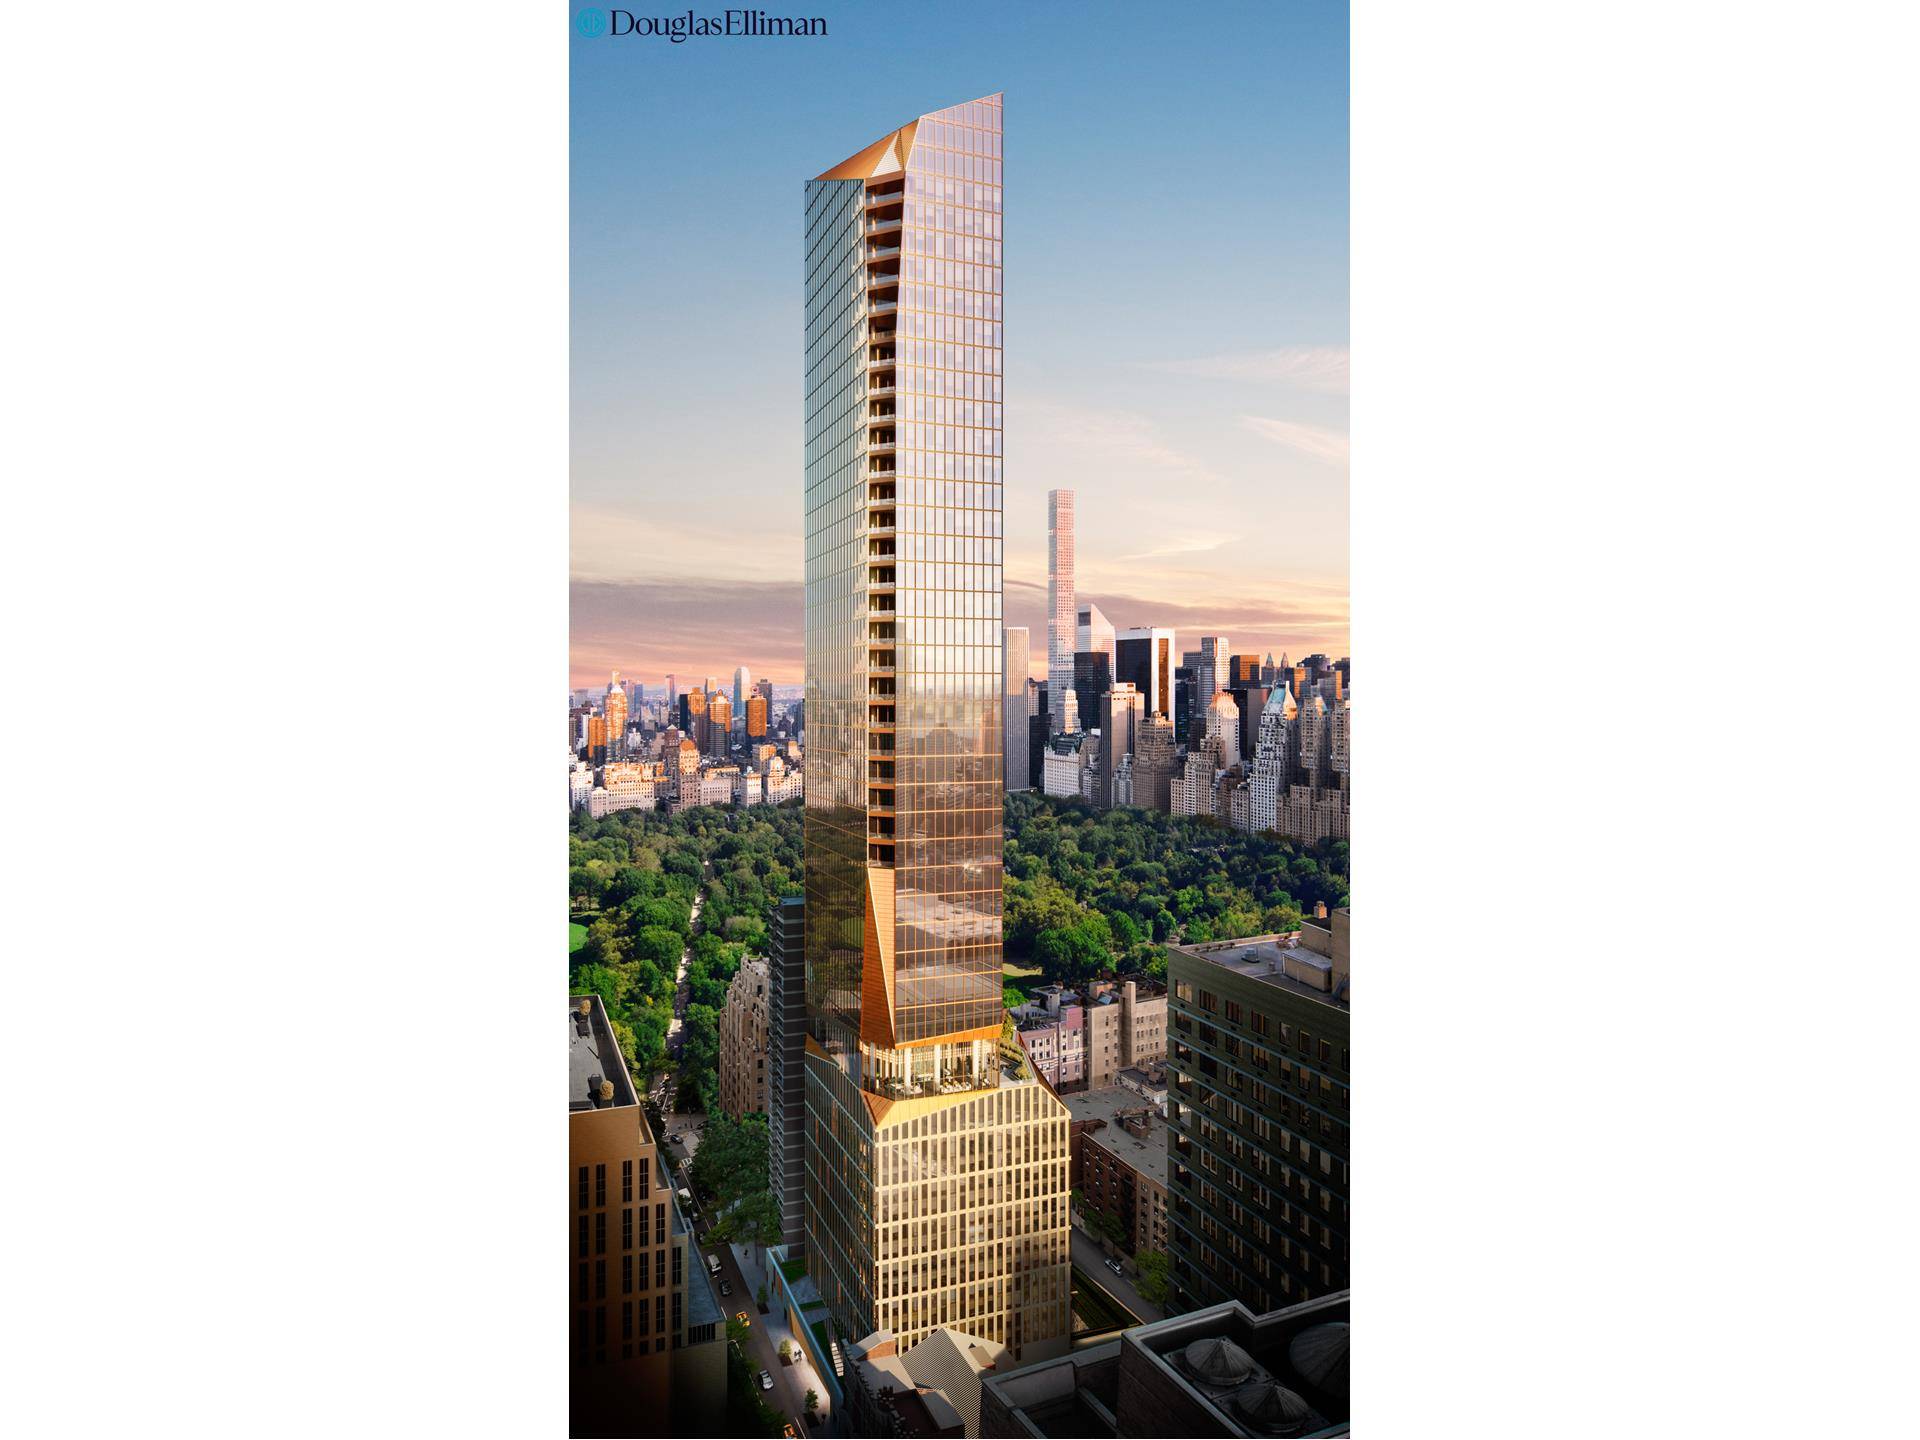 50 West 66th Street, slated to be one of the tallest and most important residential buildings that will transform the Upper West Side and the New York City Skyline.